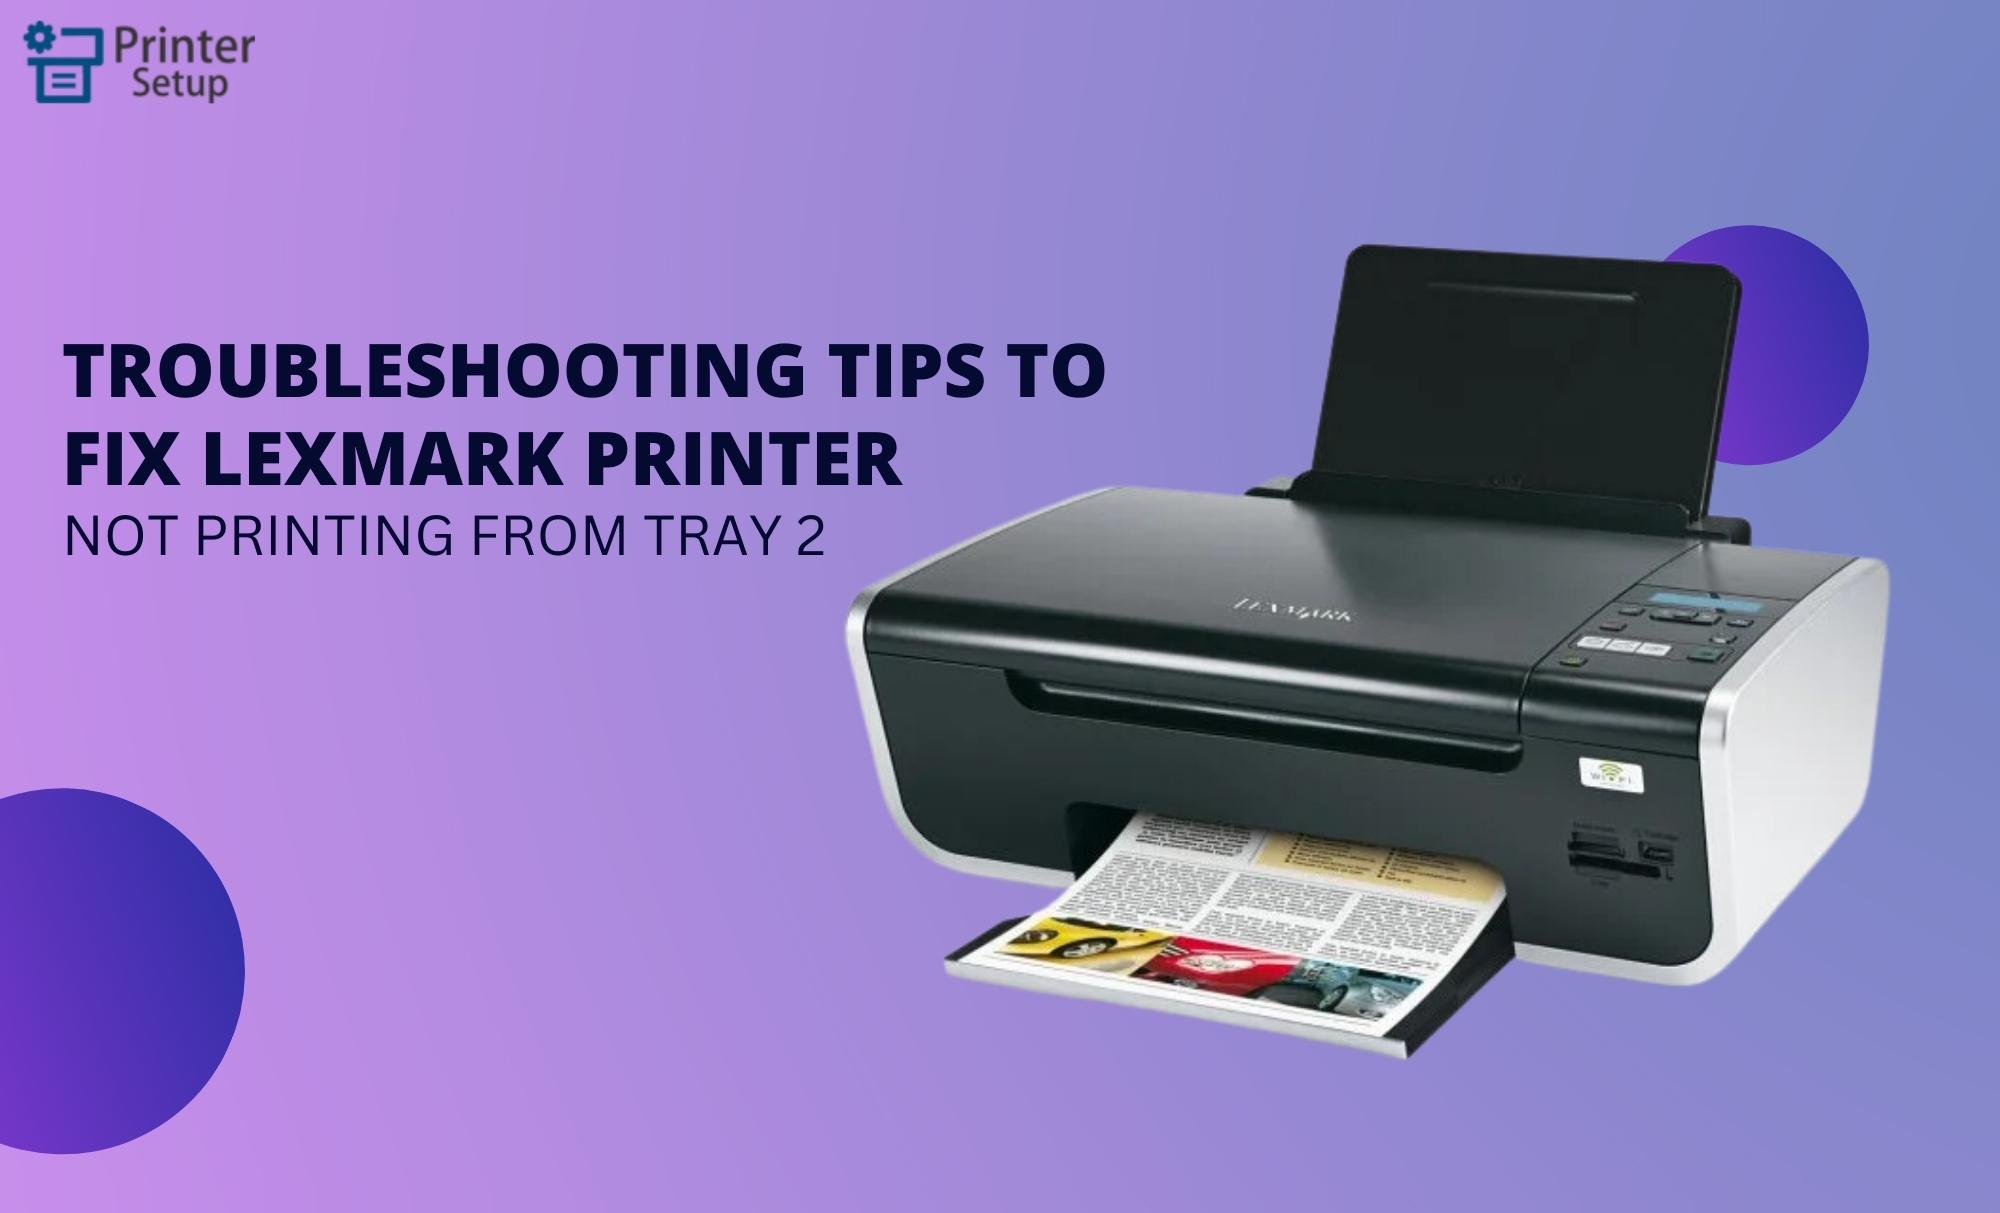 Troubleshoot Lexmark Not Printing from Tray 2 Printersetup